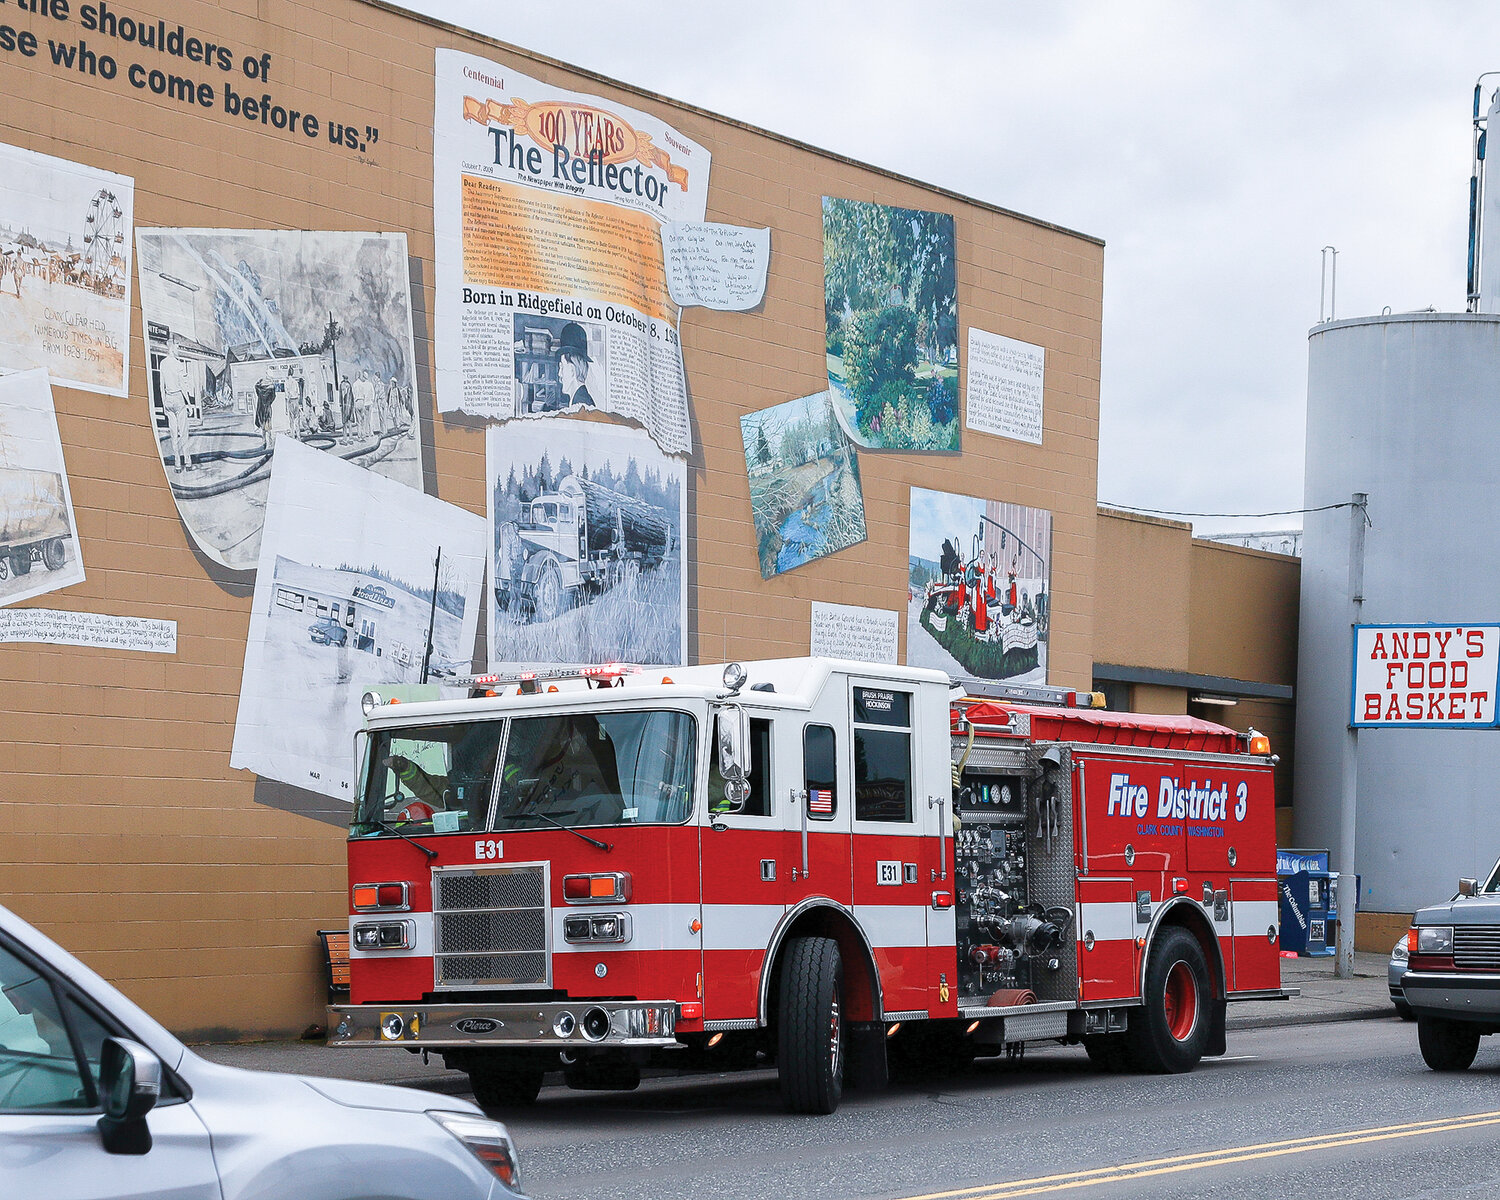 A Clark County Fire District 3 engine sits in front of the Battle Ground mural on Main Street.